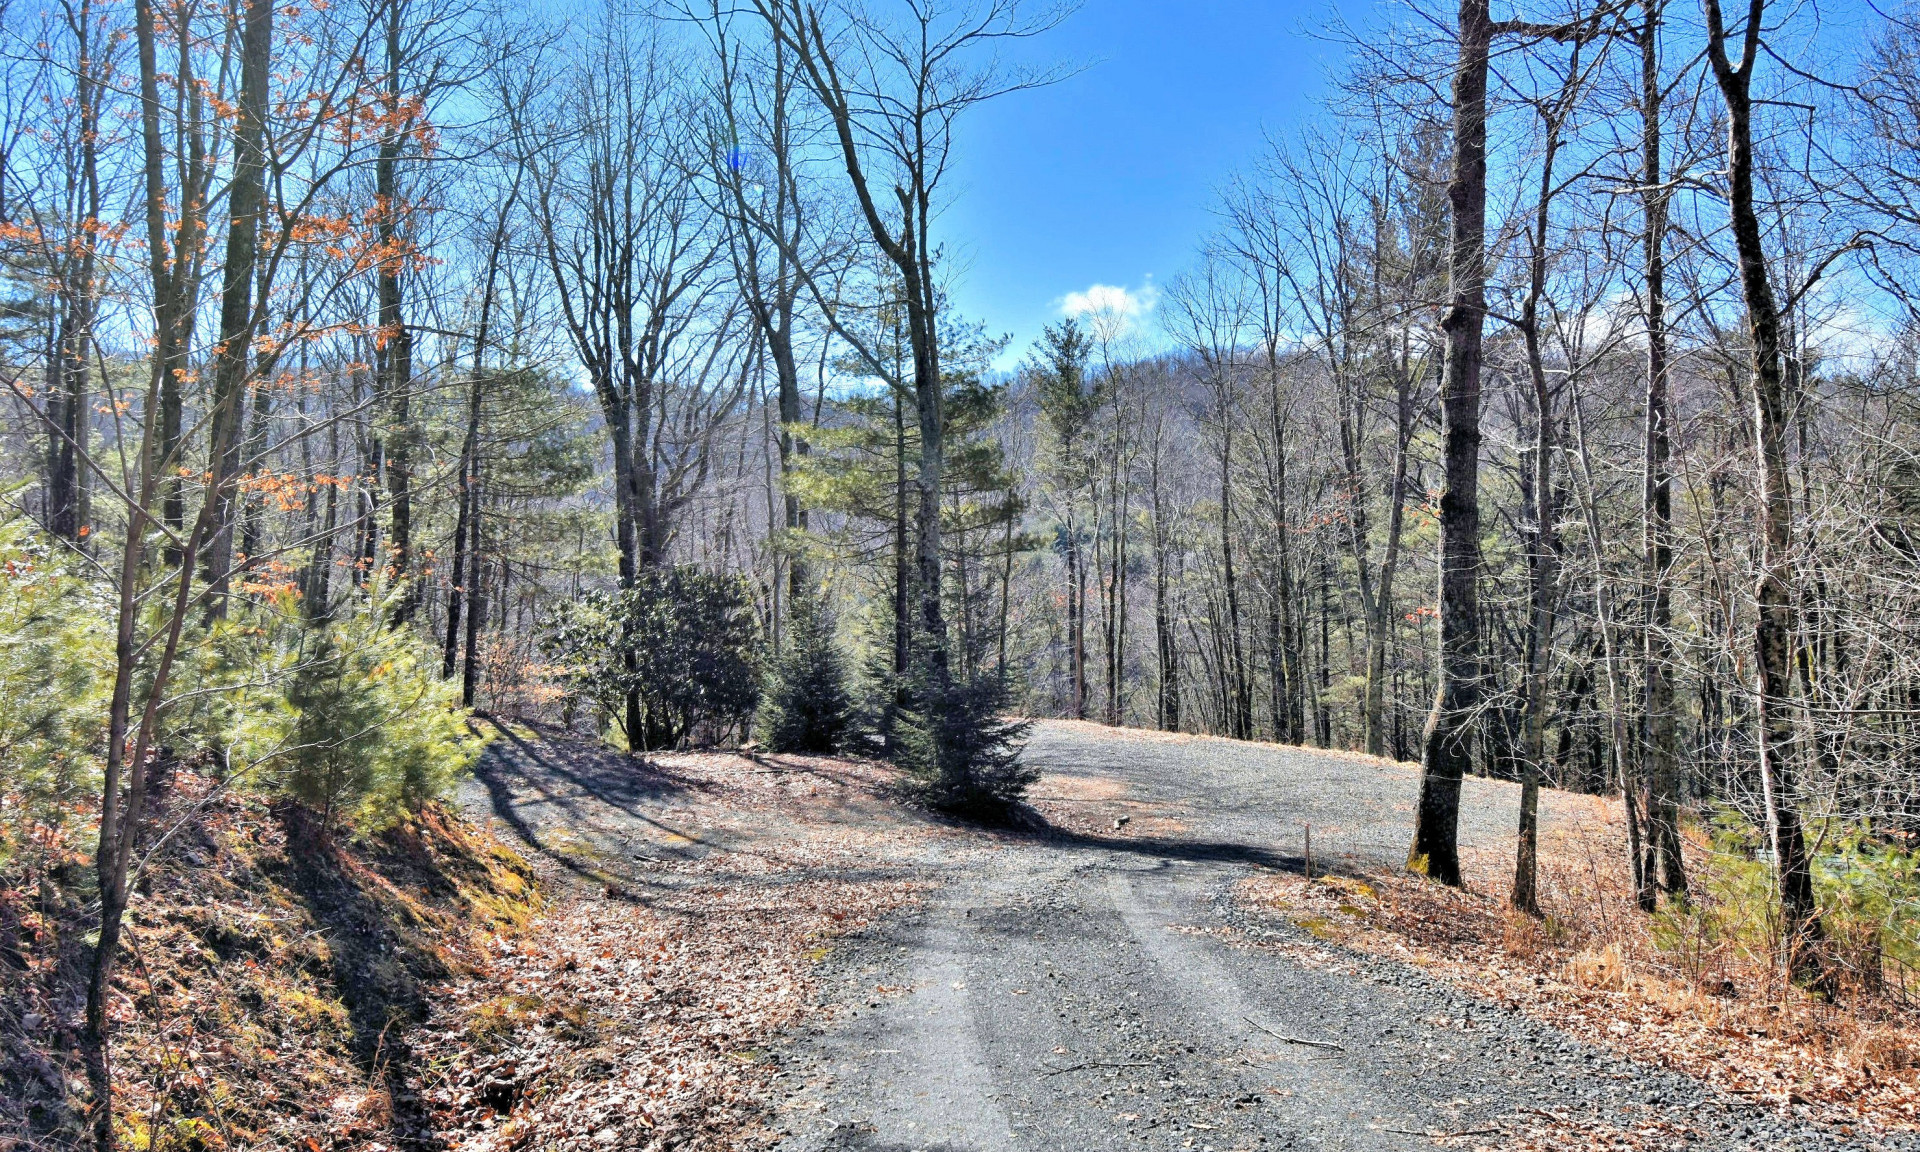 Take a look at this gorgeous NC Mountain home site located in Vista Ridge, a quiet community in the West Jefferson area of the NC High Country.